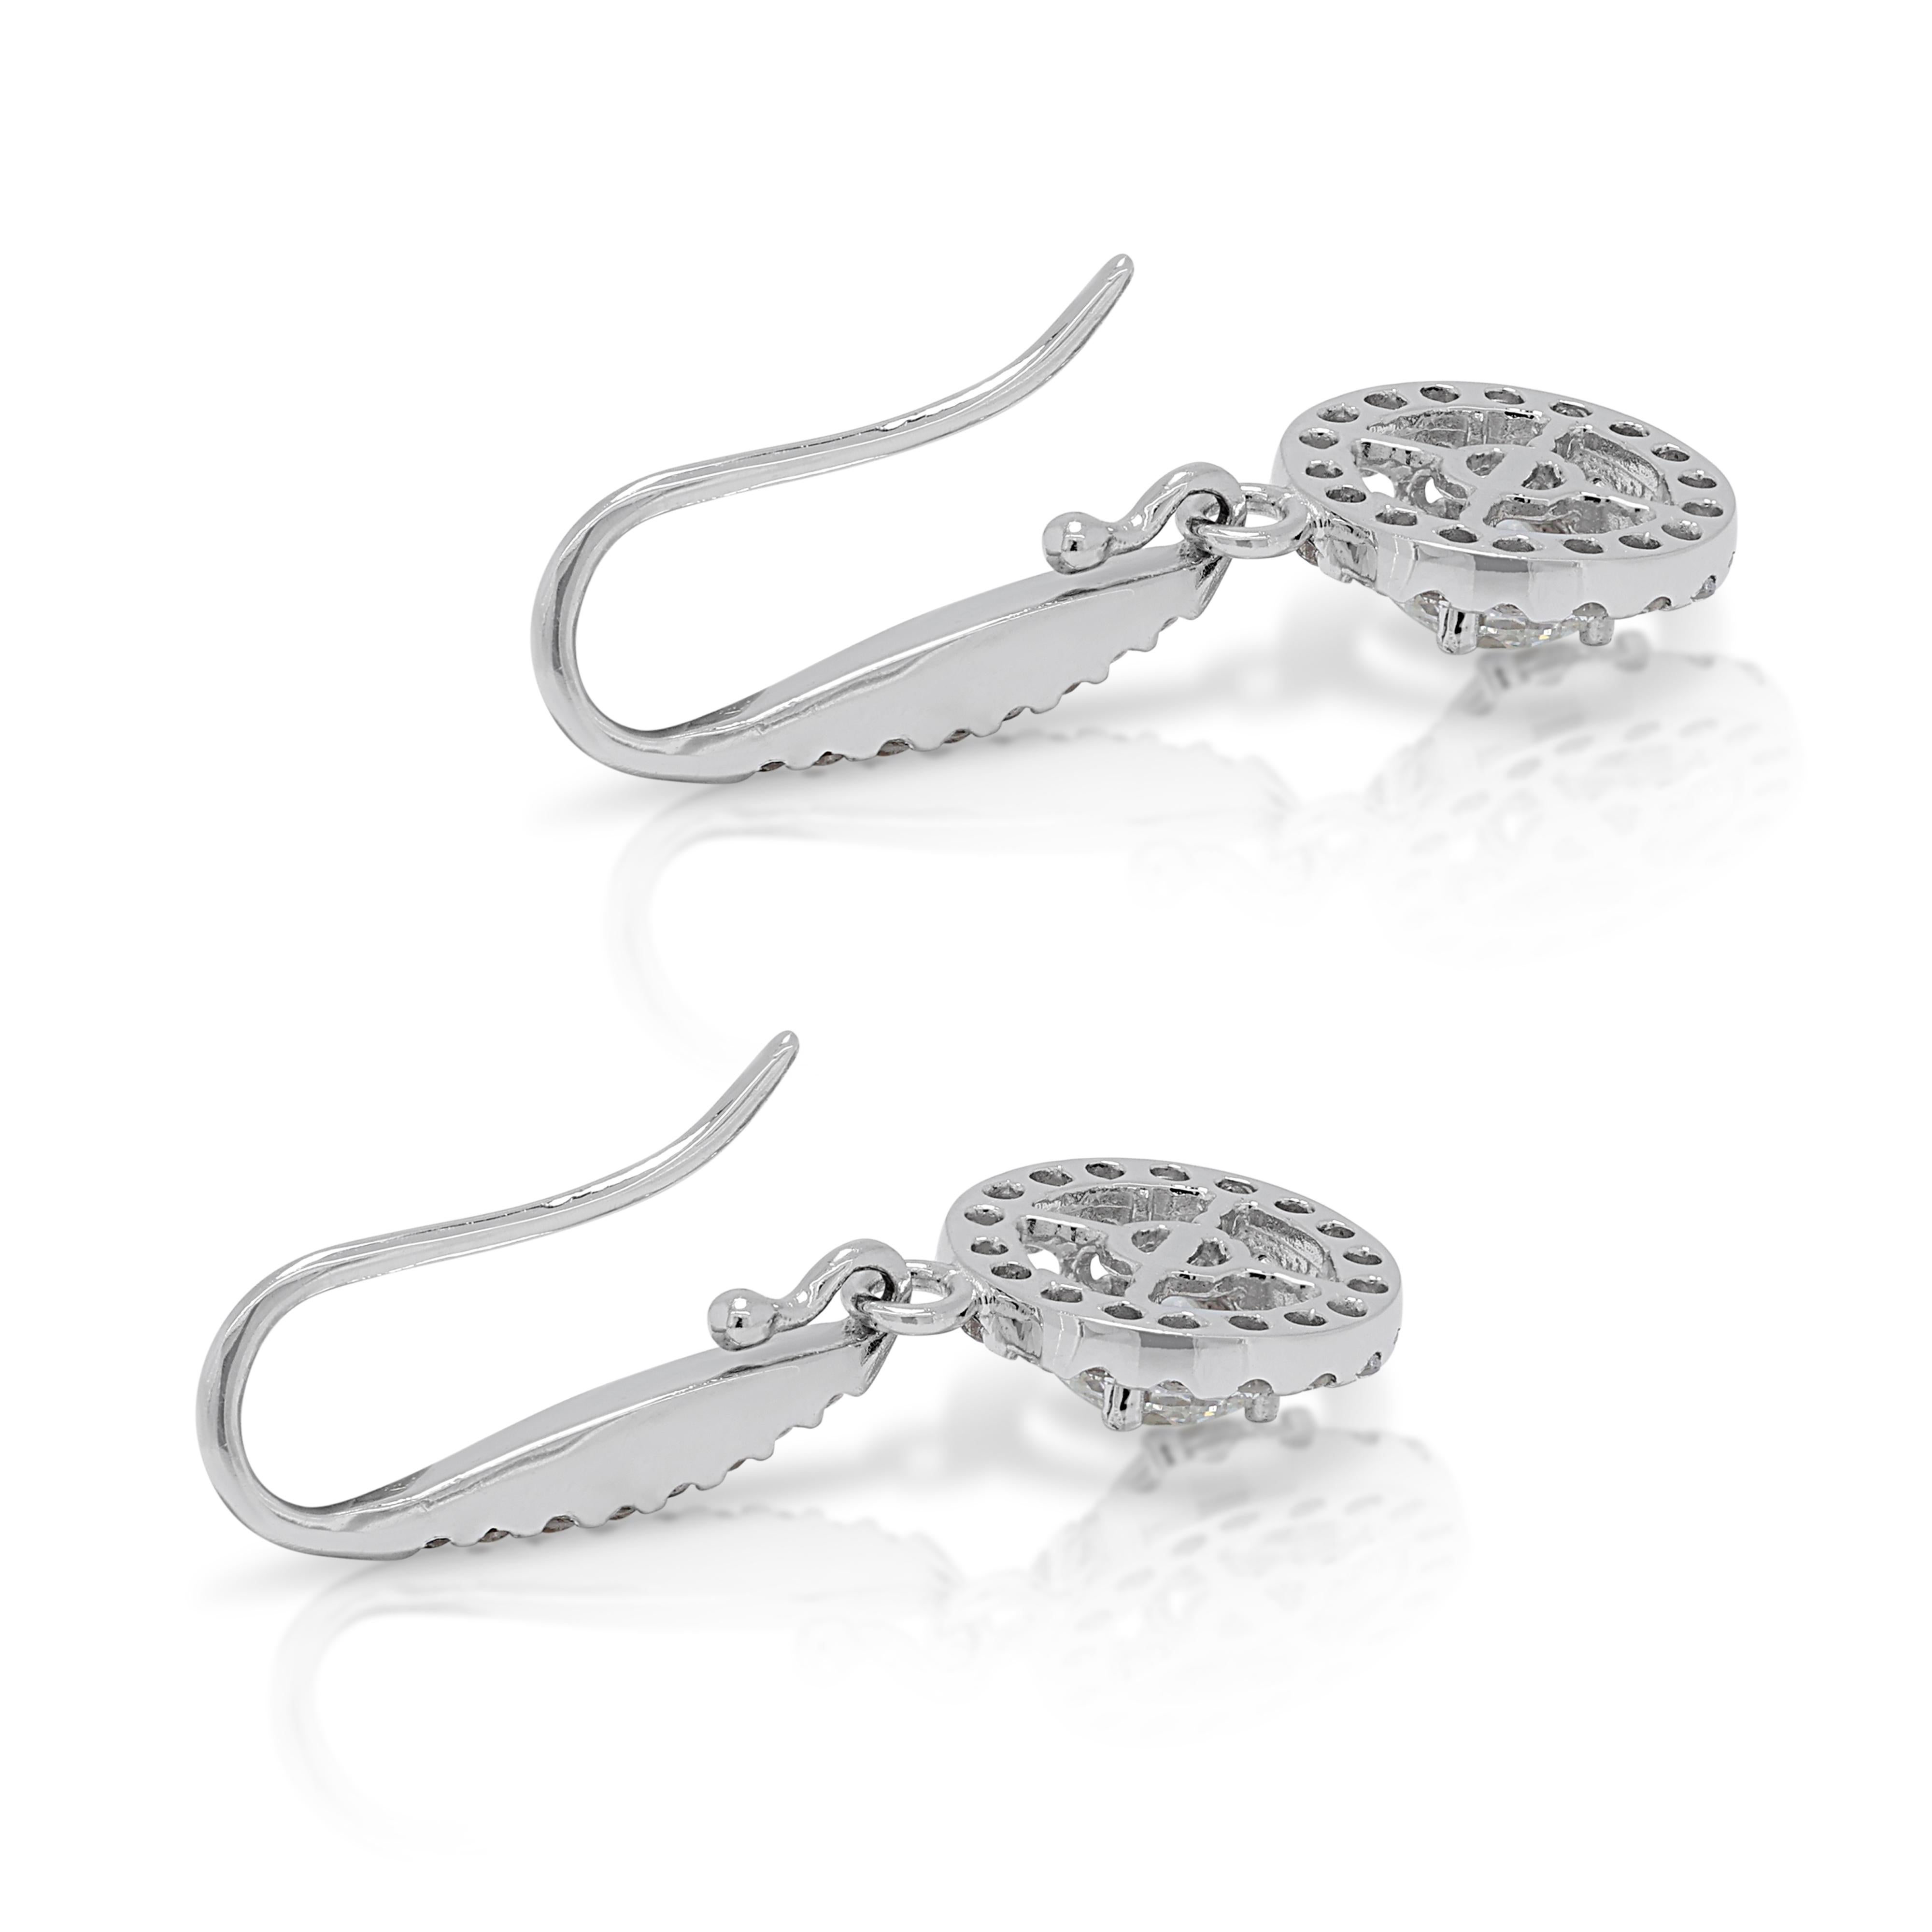 Fascinating 0.86ct Diamond Dangling Earrings in 18K White Gold  For Sale 3